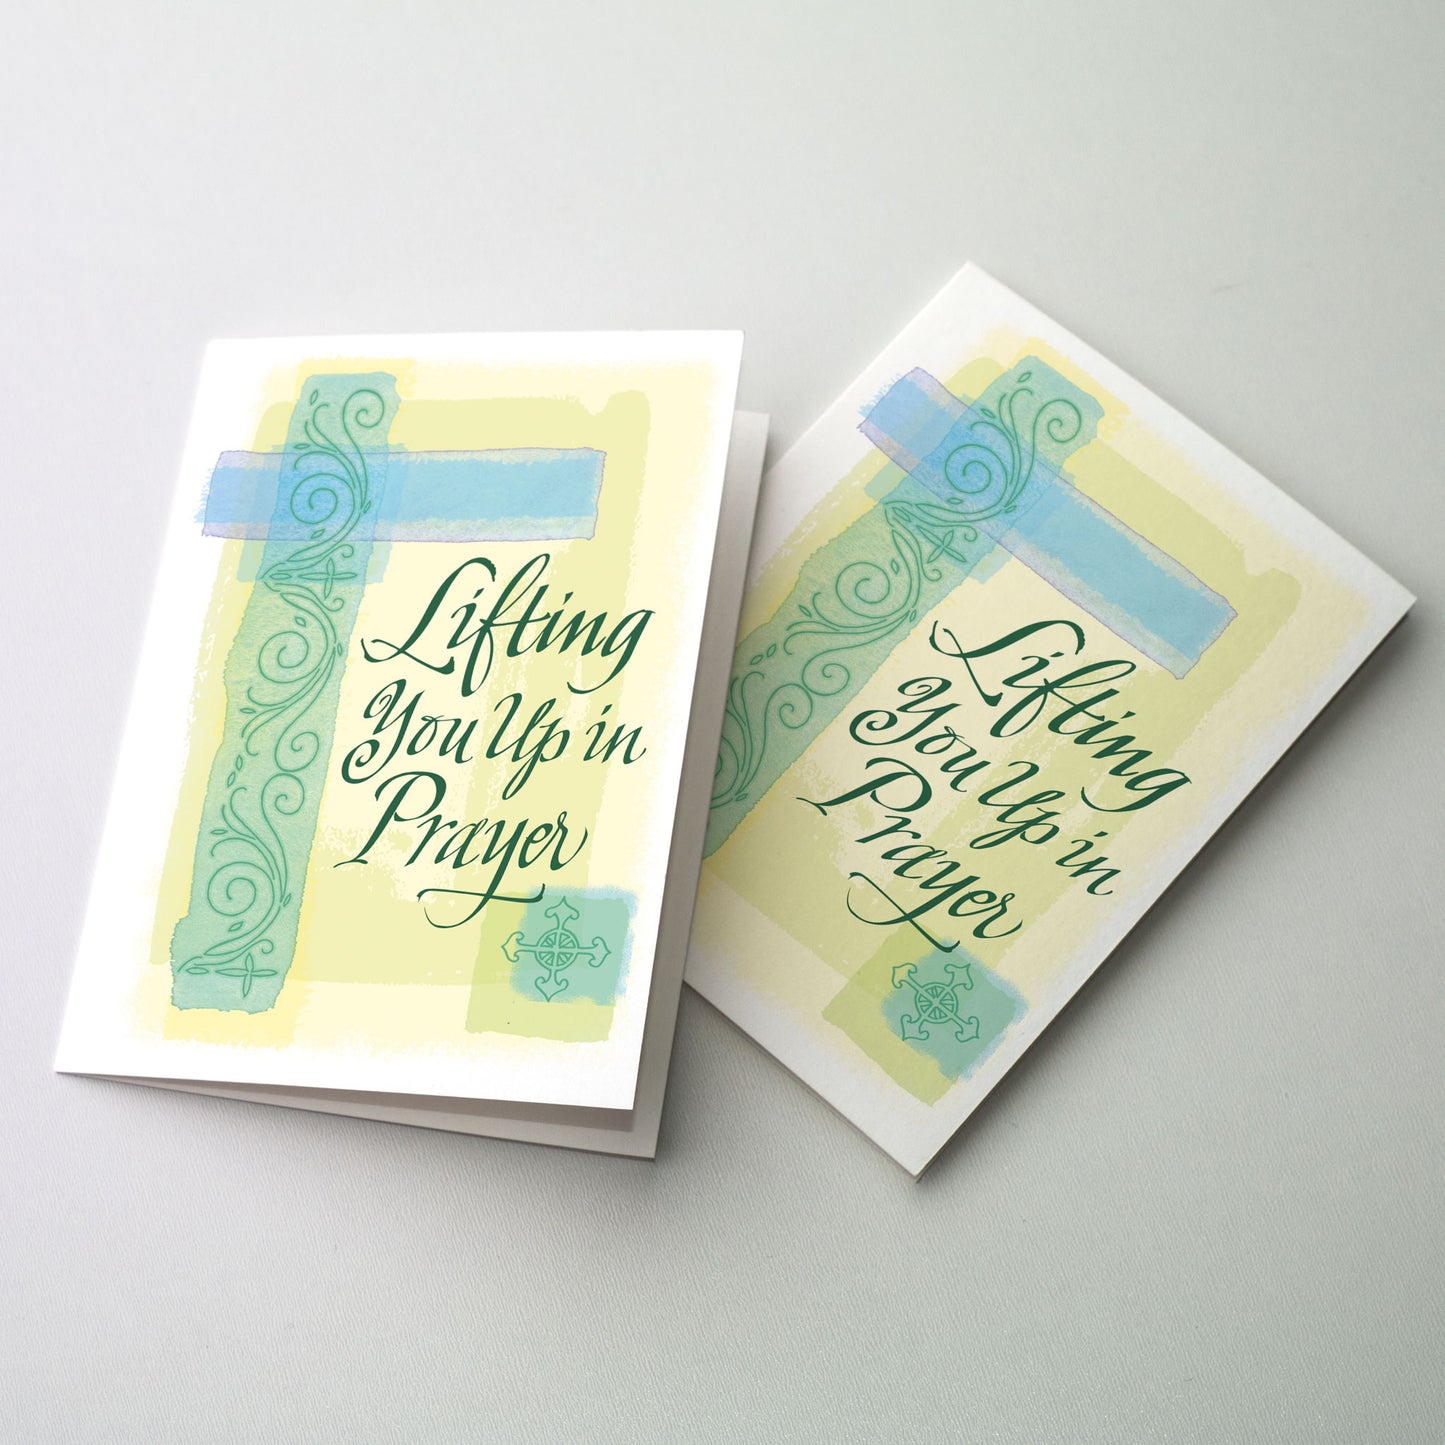 Lifting You Up in Prayer - Get Well Card